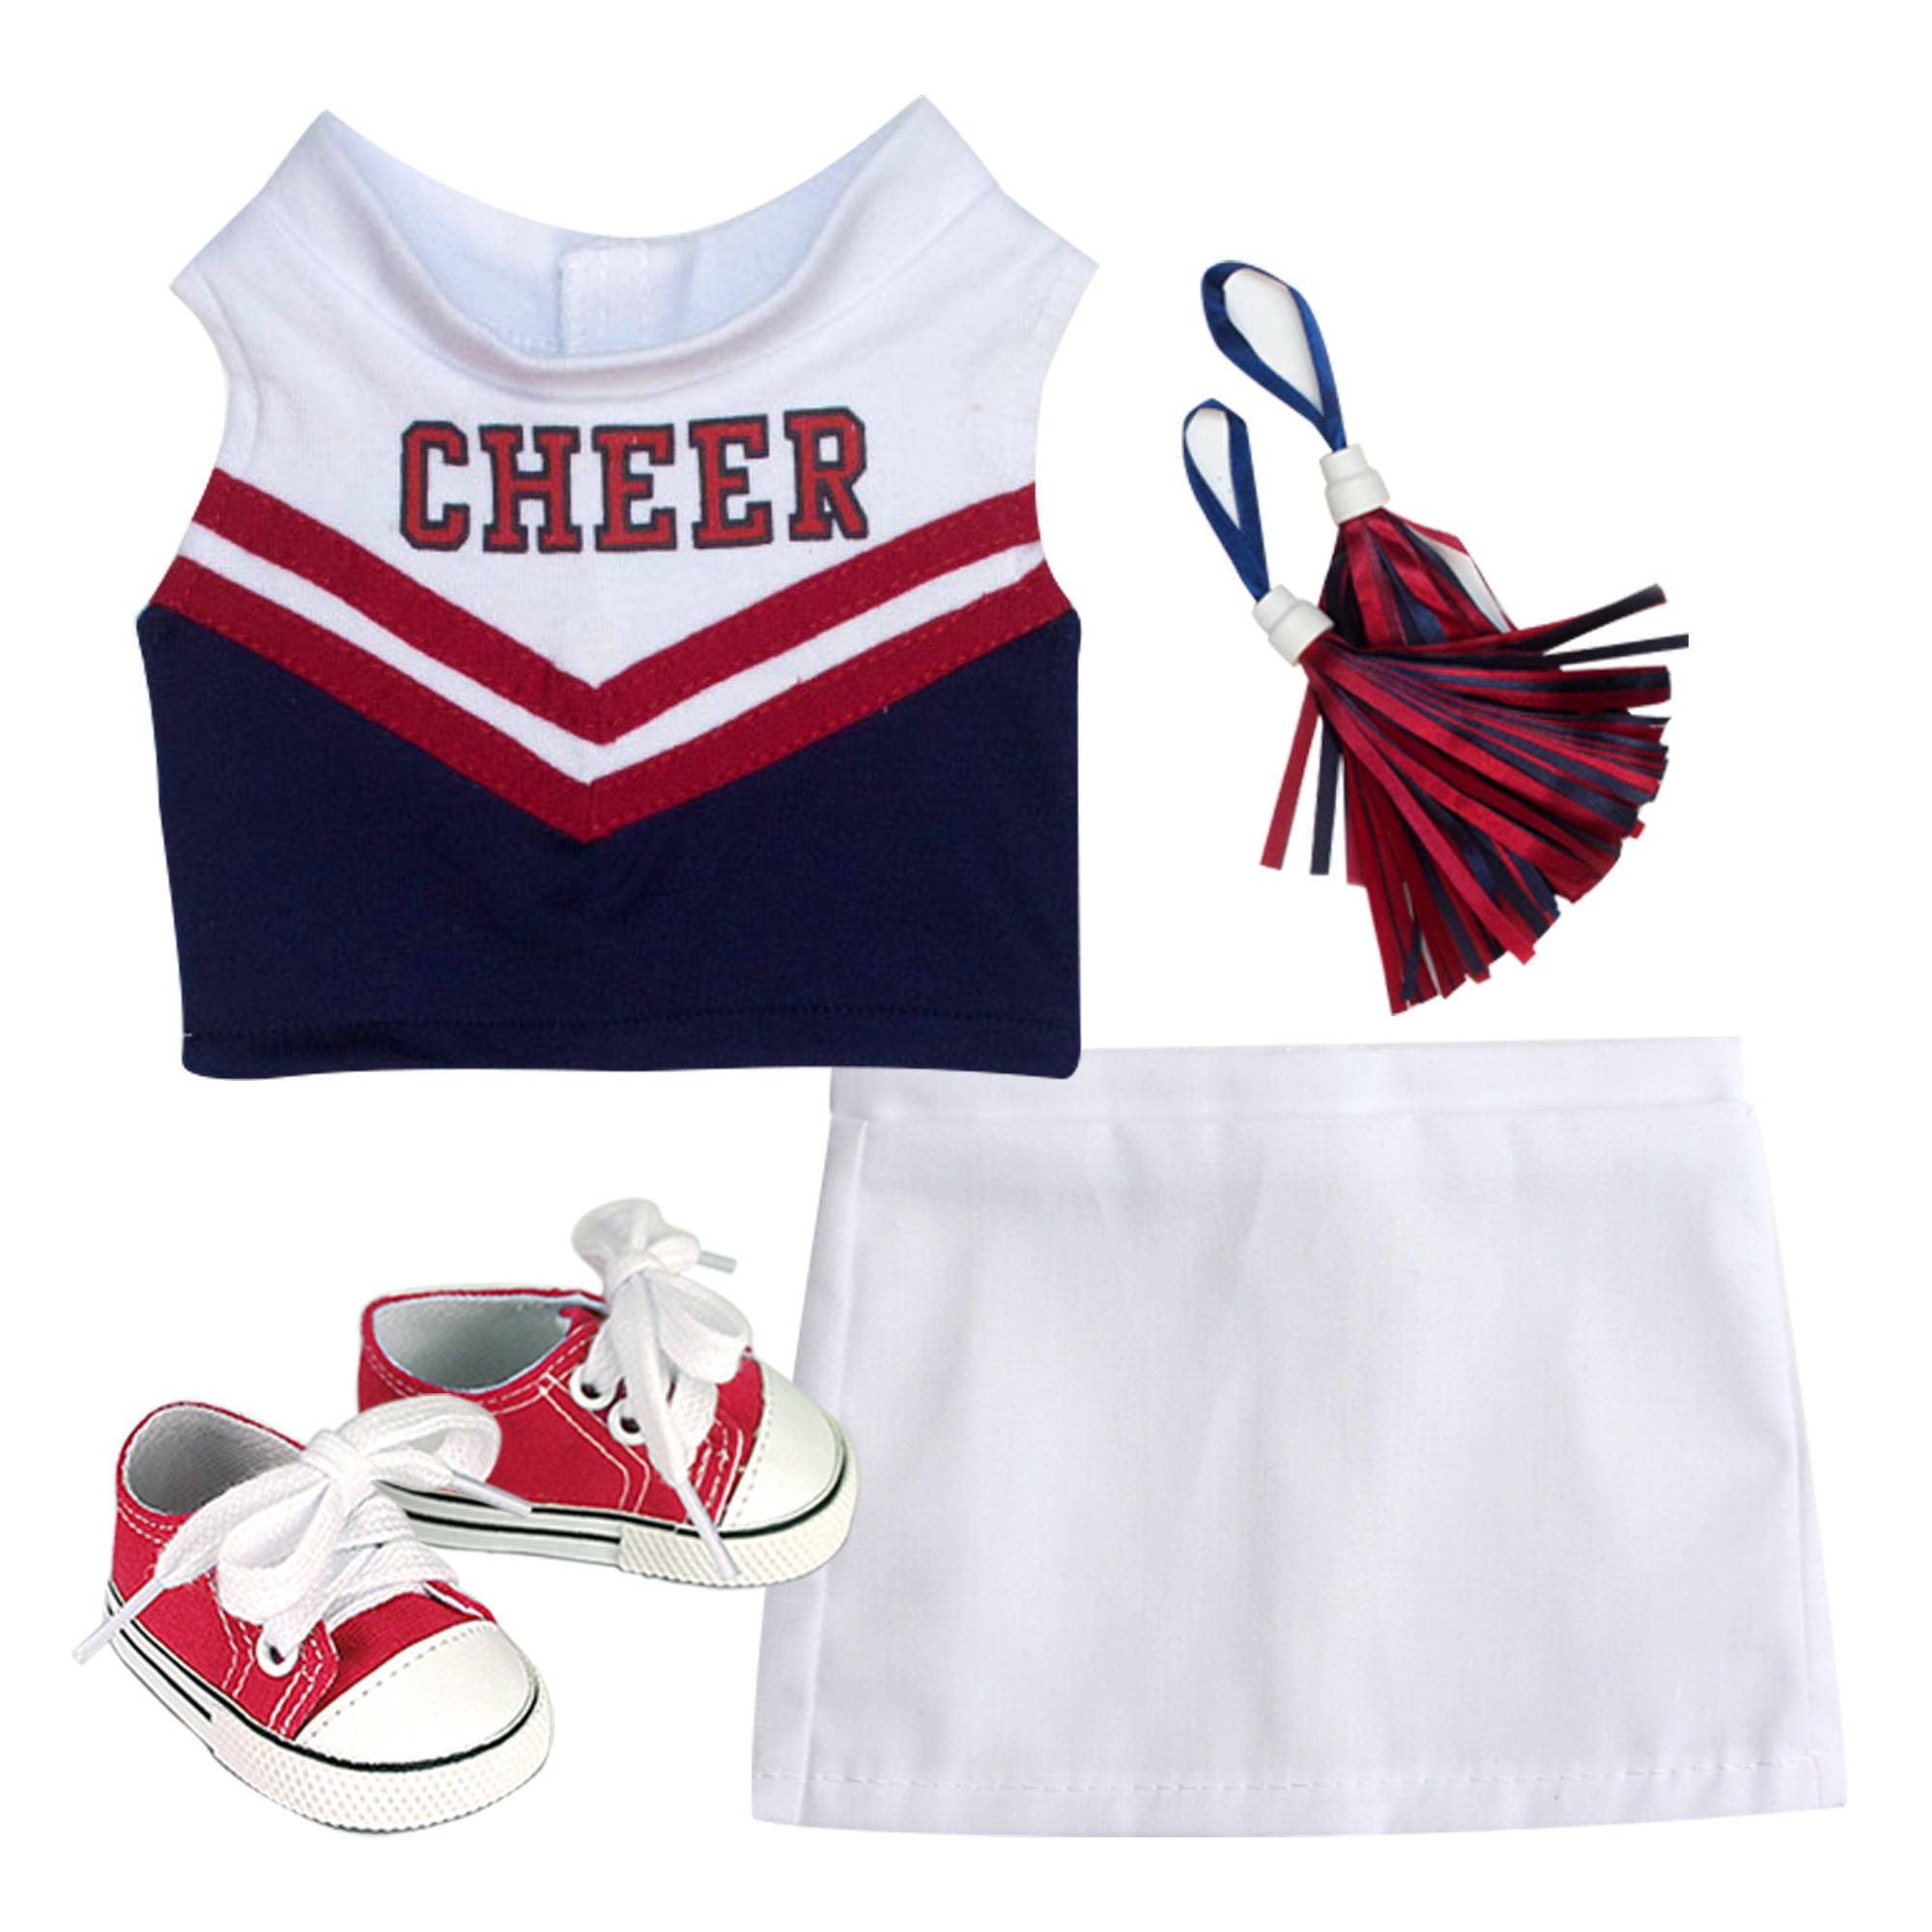 18-inch Doll Clothes - Cheerleader Dress with Pants and Pom Poms